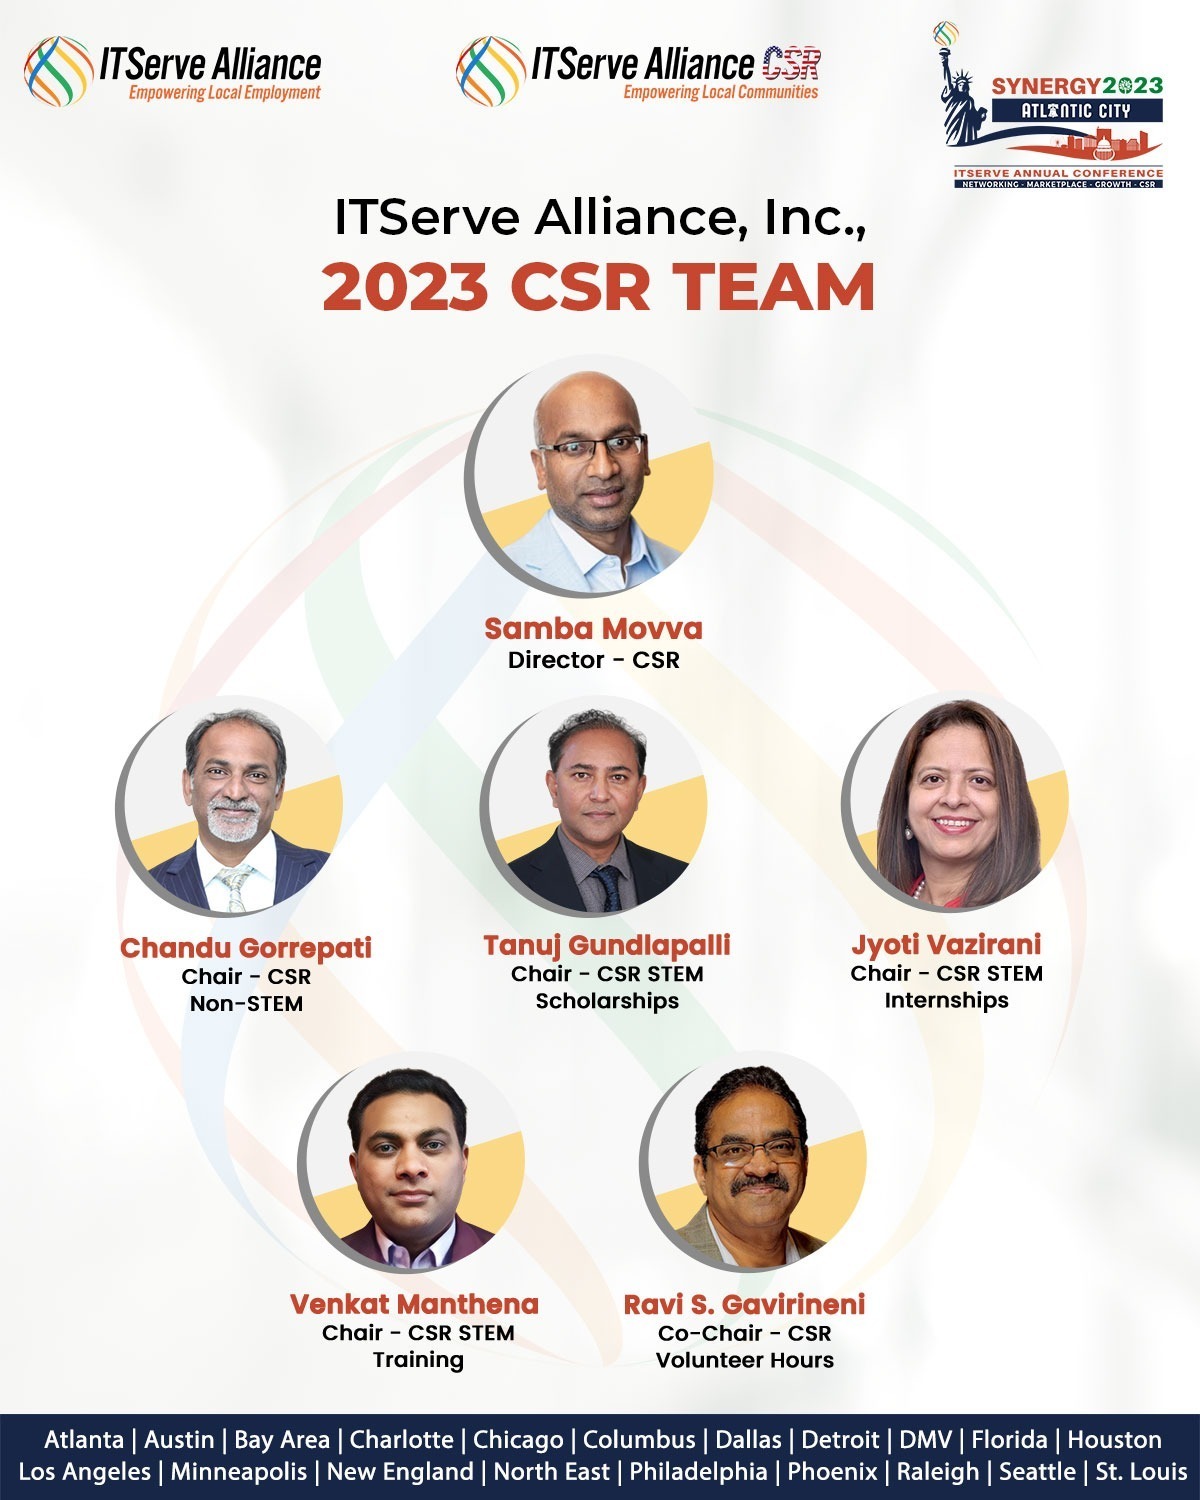 ITServe Alliance’s CSR Program is ‘Empowering Future Generations’ STEMming from $1.5 million educational funds